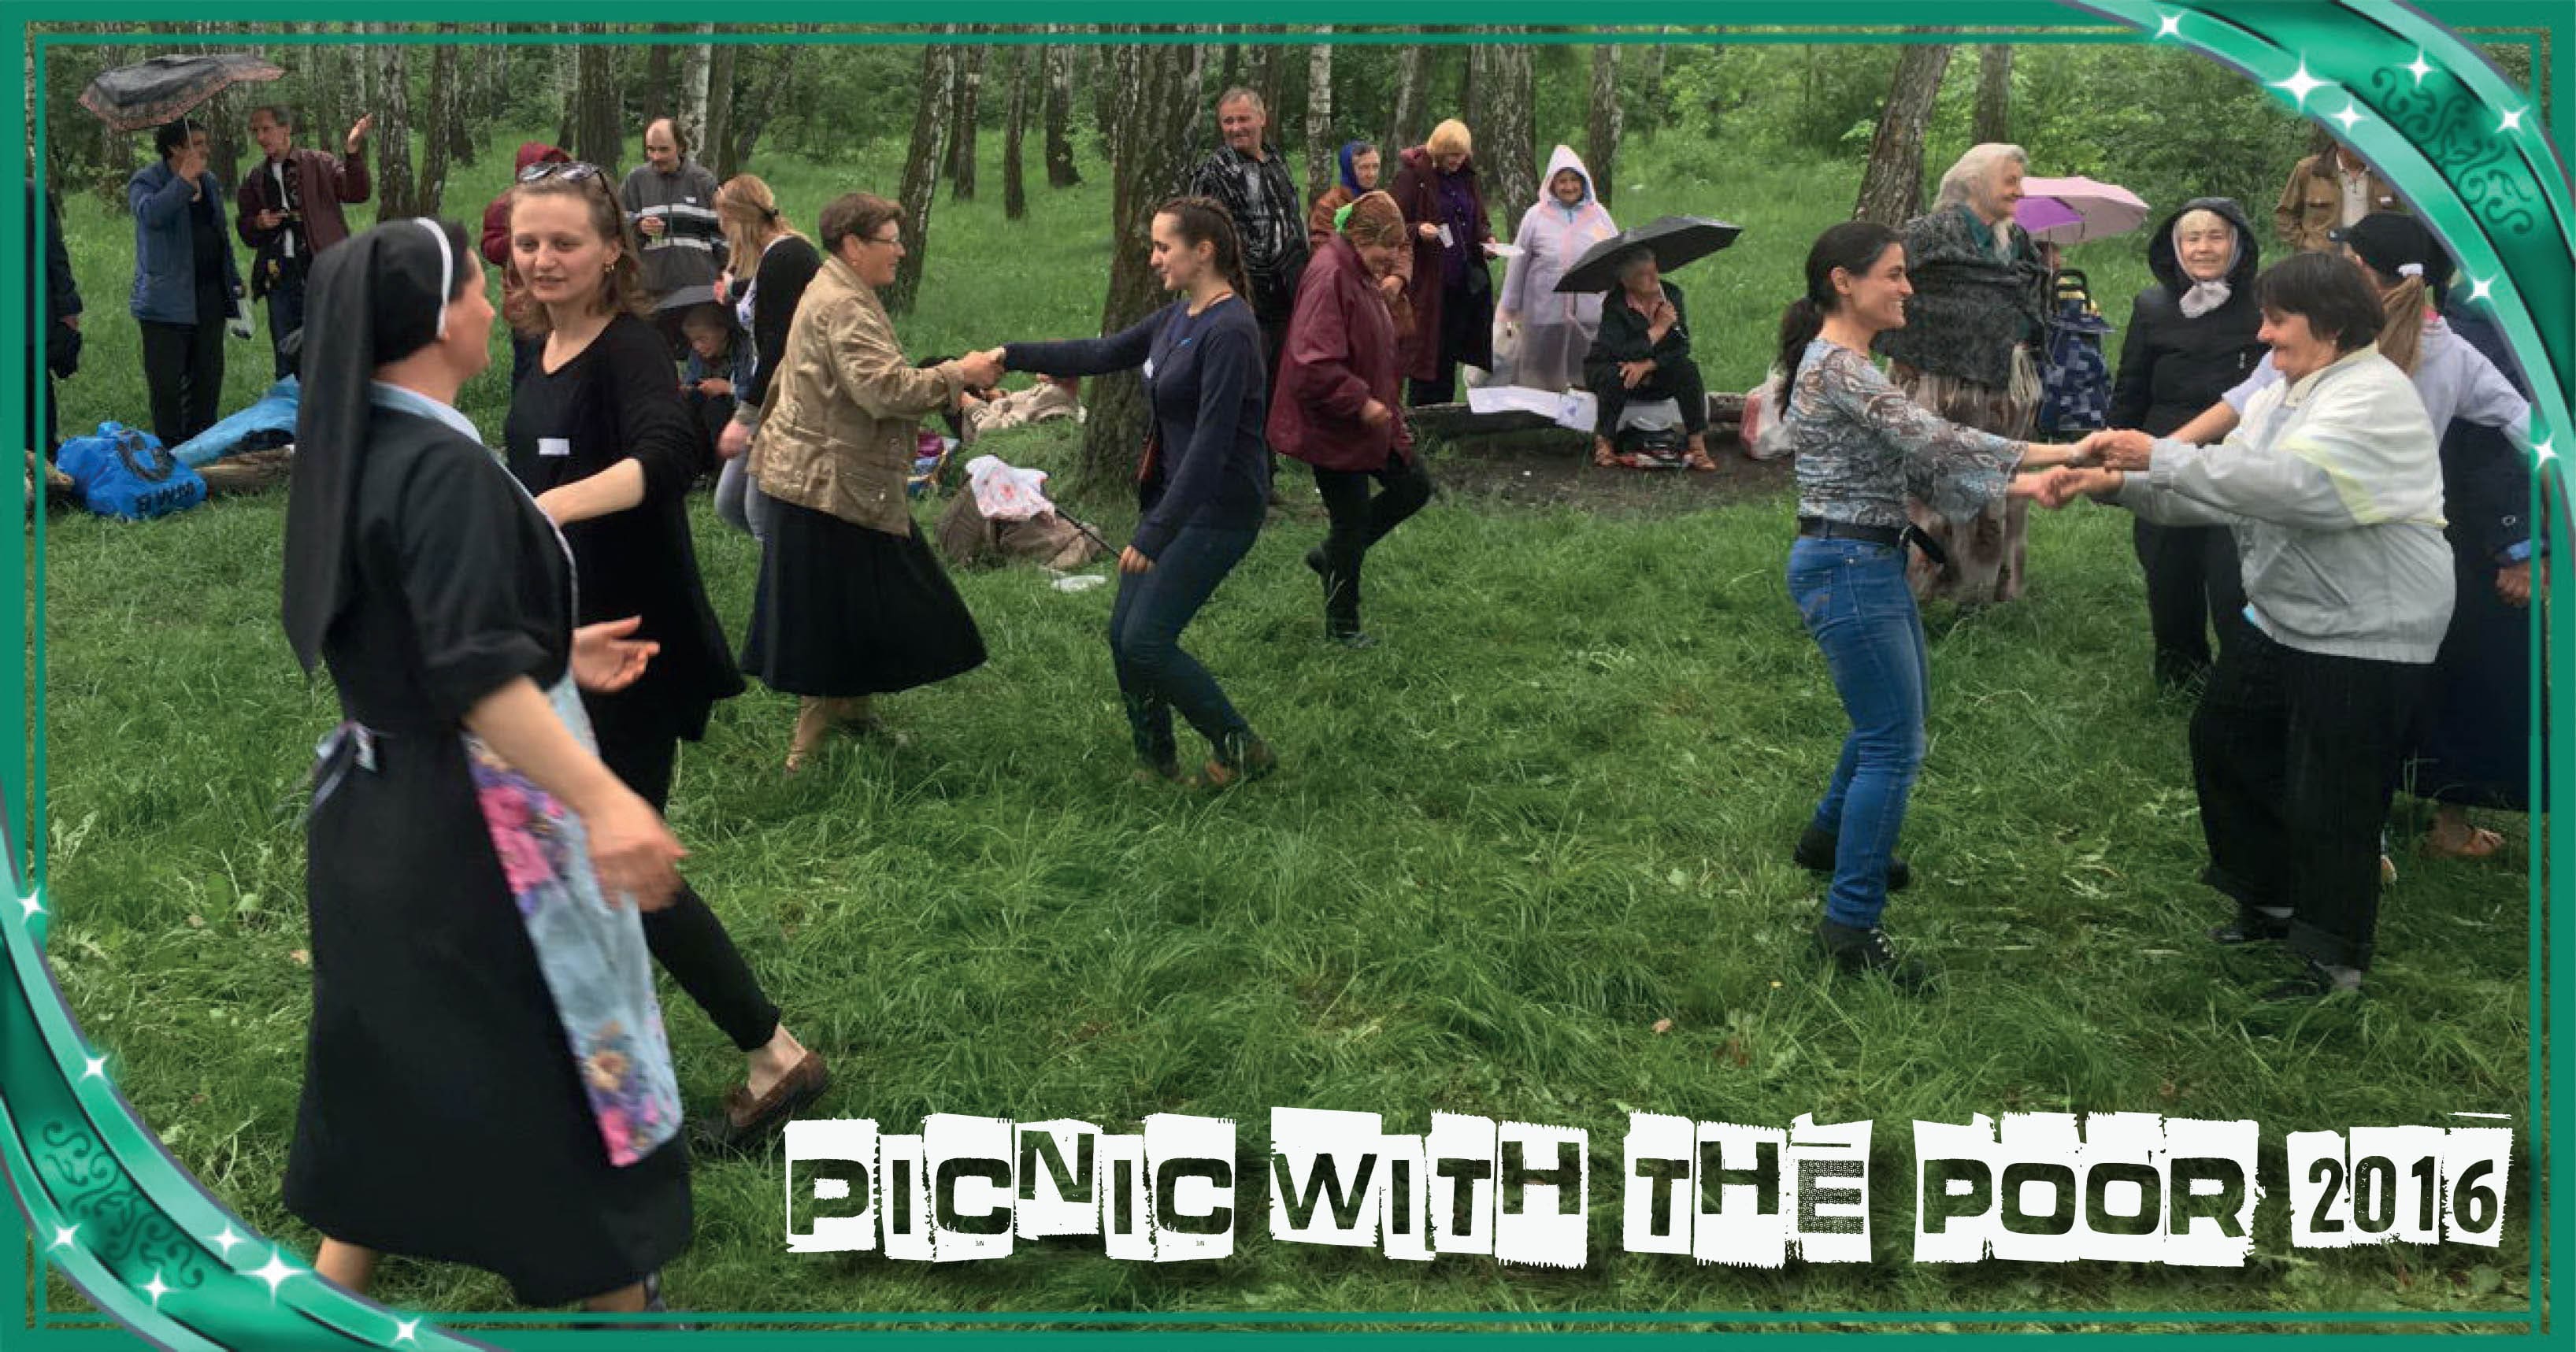 Picnic with the poor 2016